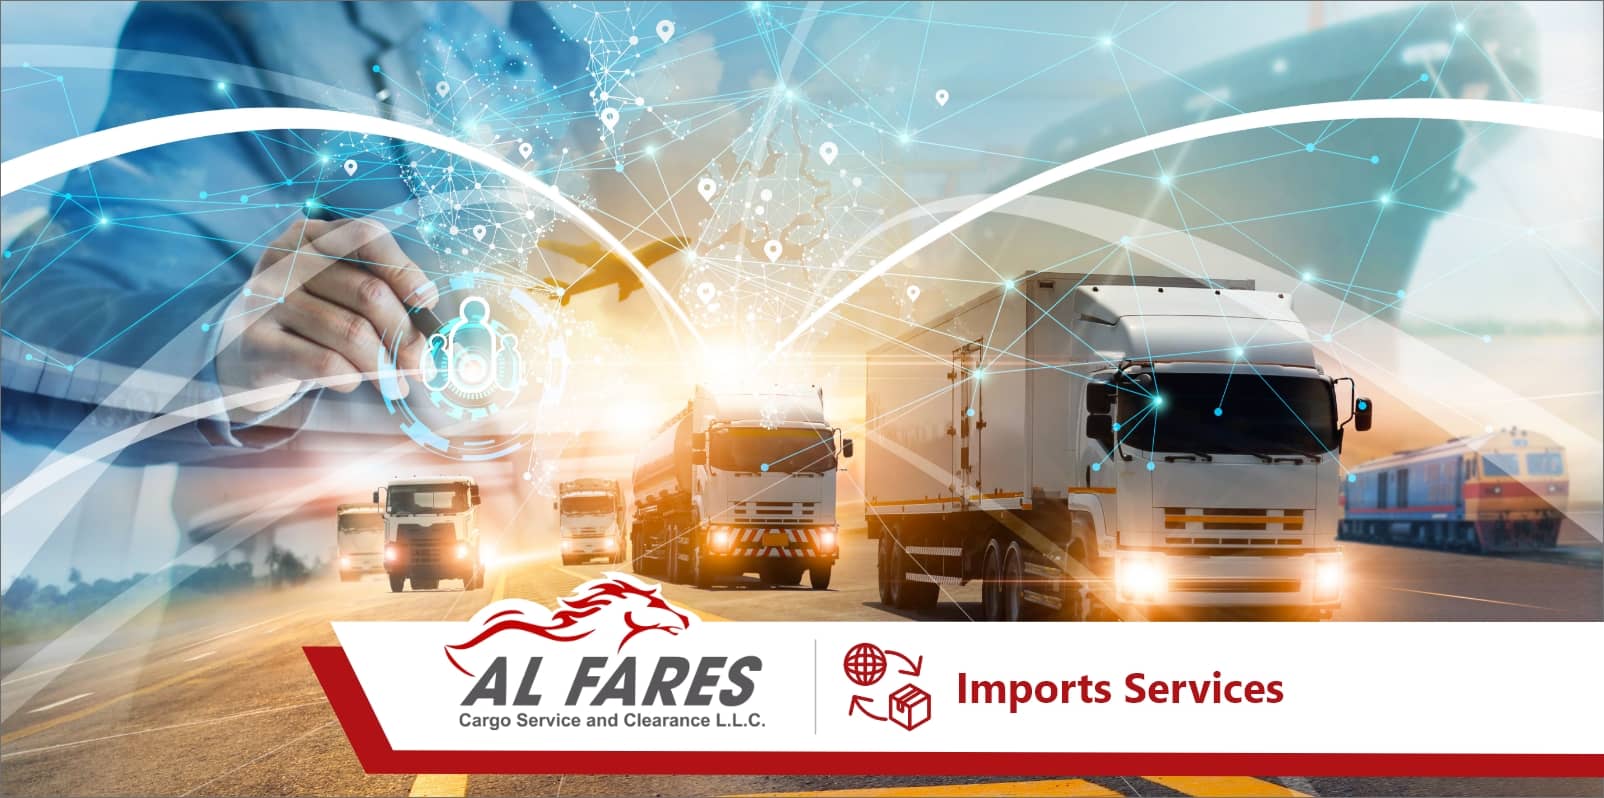 Imports Services